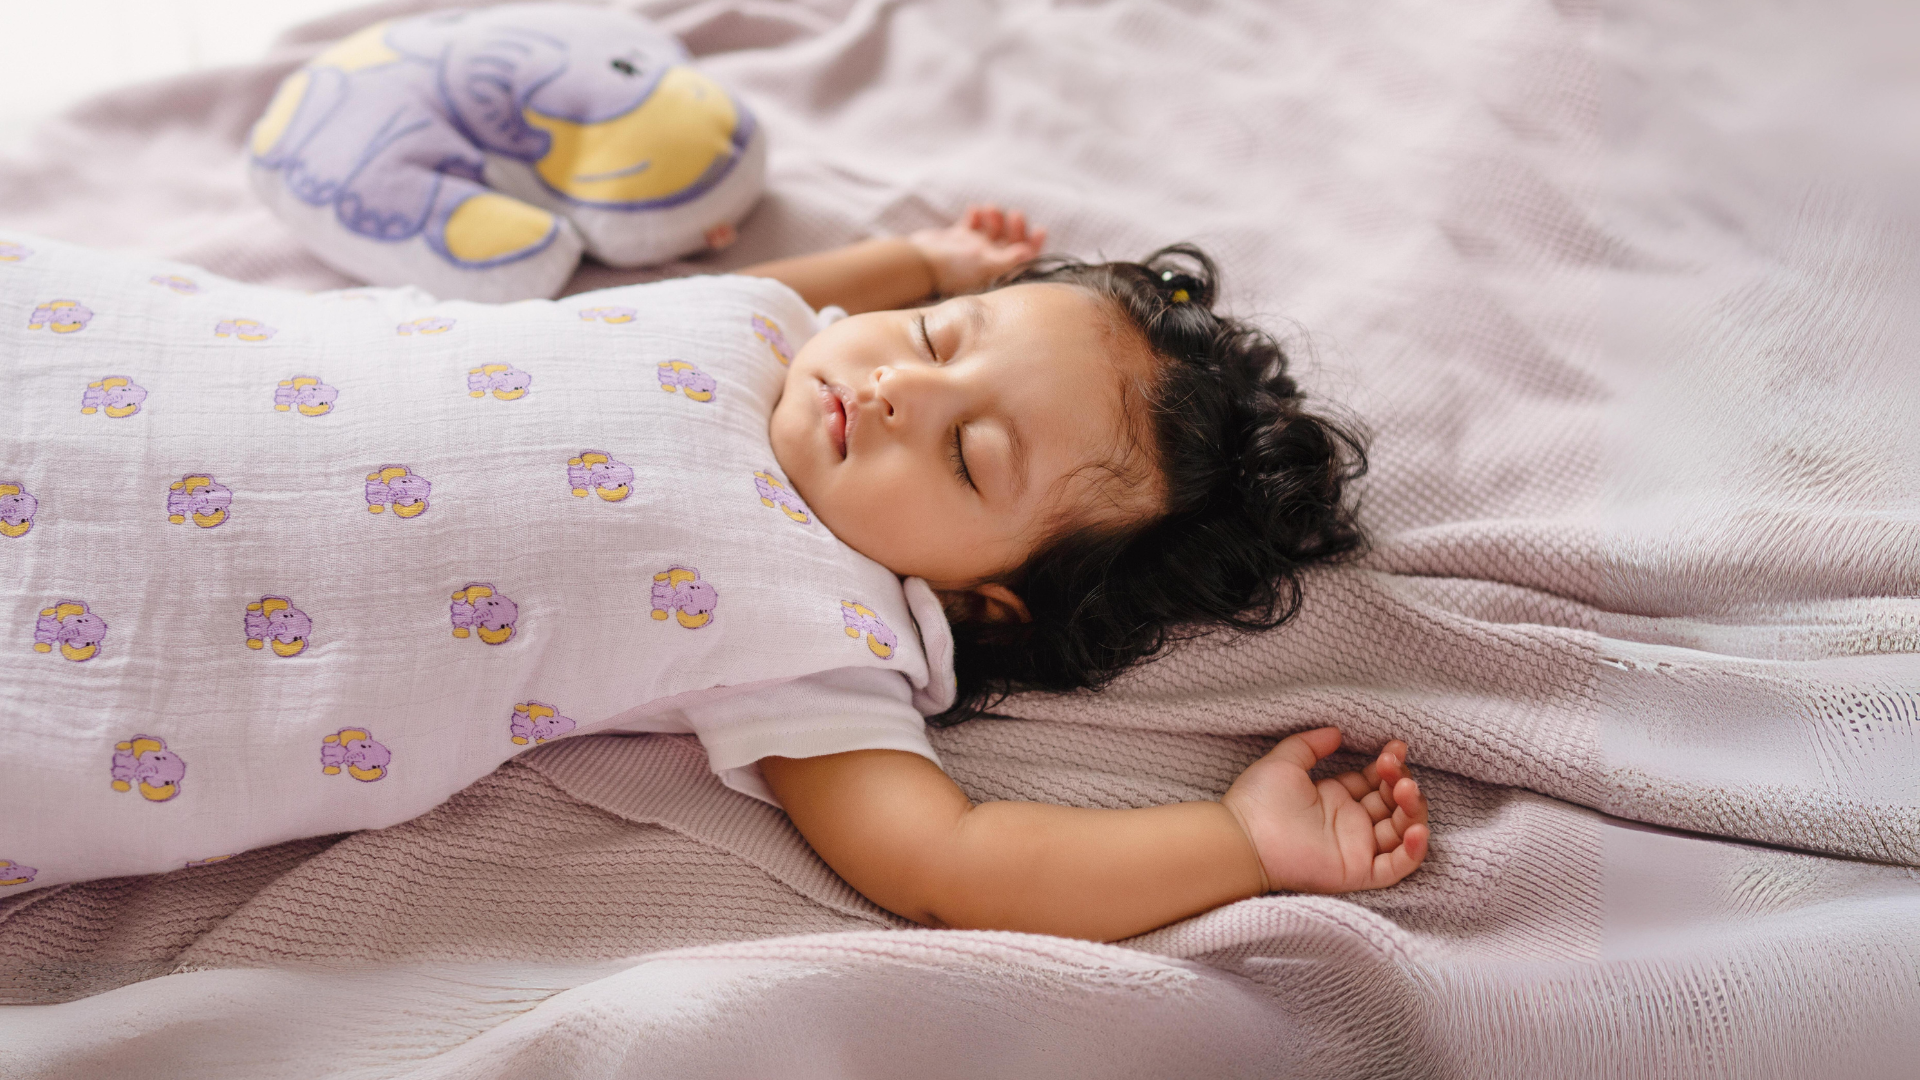 Bedtime Practices That Will Send Your Bub Off to Dreamland!